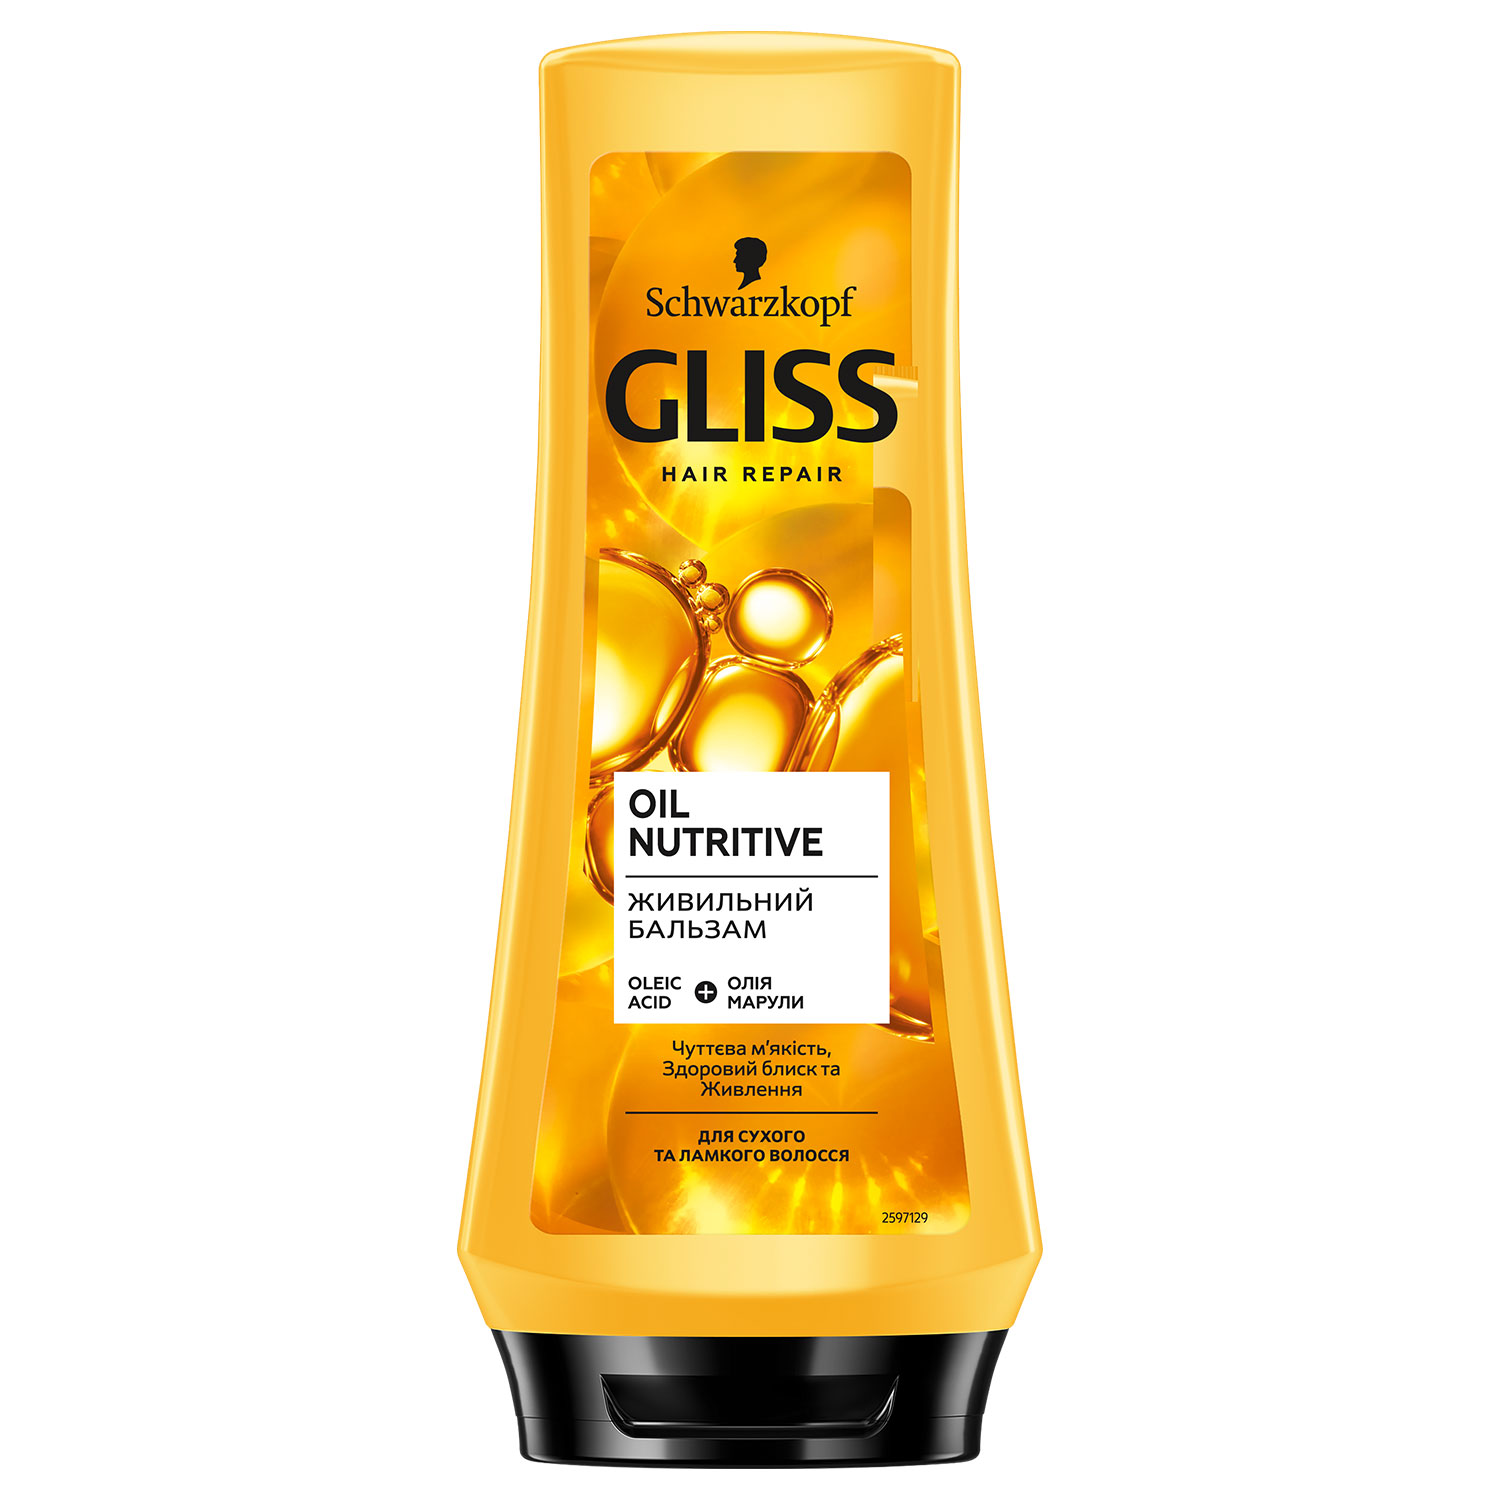 GLISS Oil Nutritive nourishing balm for dry and damaged hair 200 ml